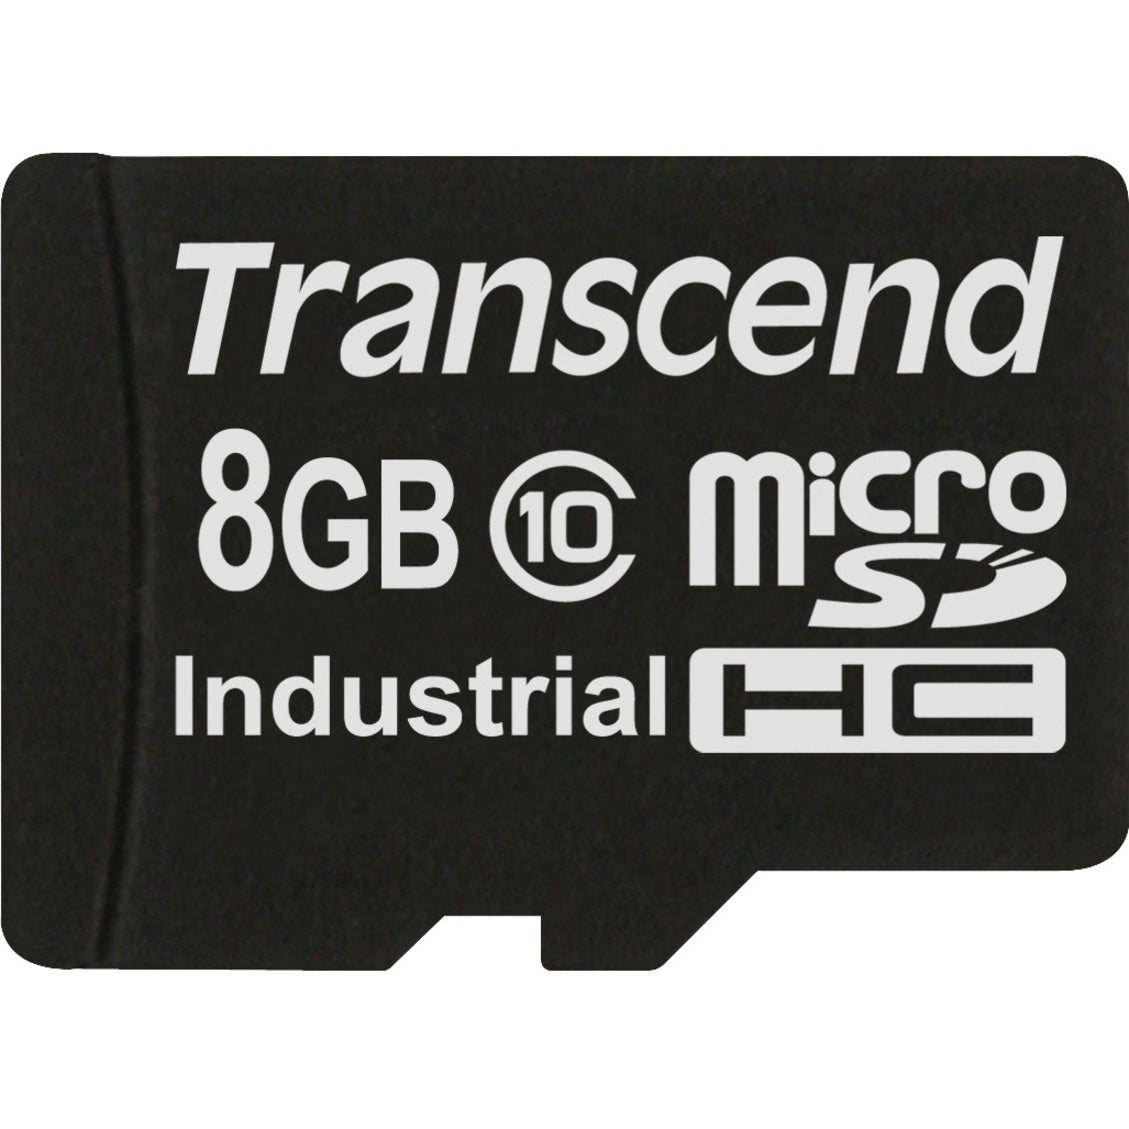 Transcend TS8GUSDHC10 8GB microSDHC Card, Class 10 - High Capacity Storage for Your Devices